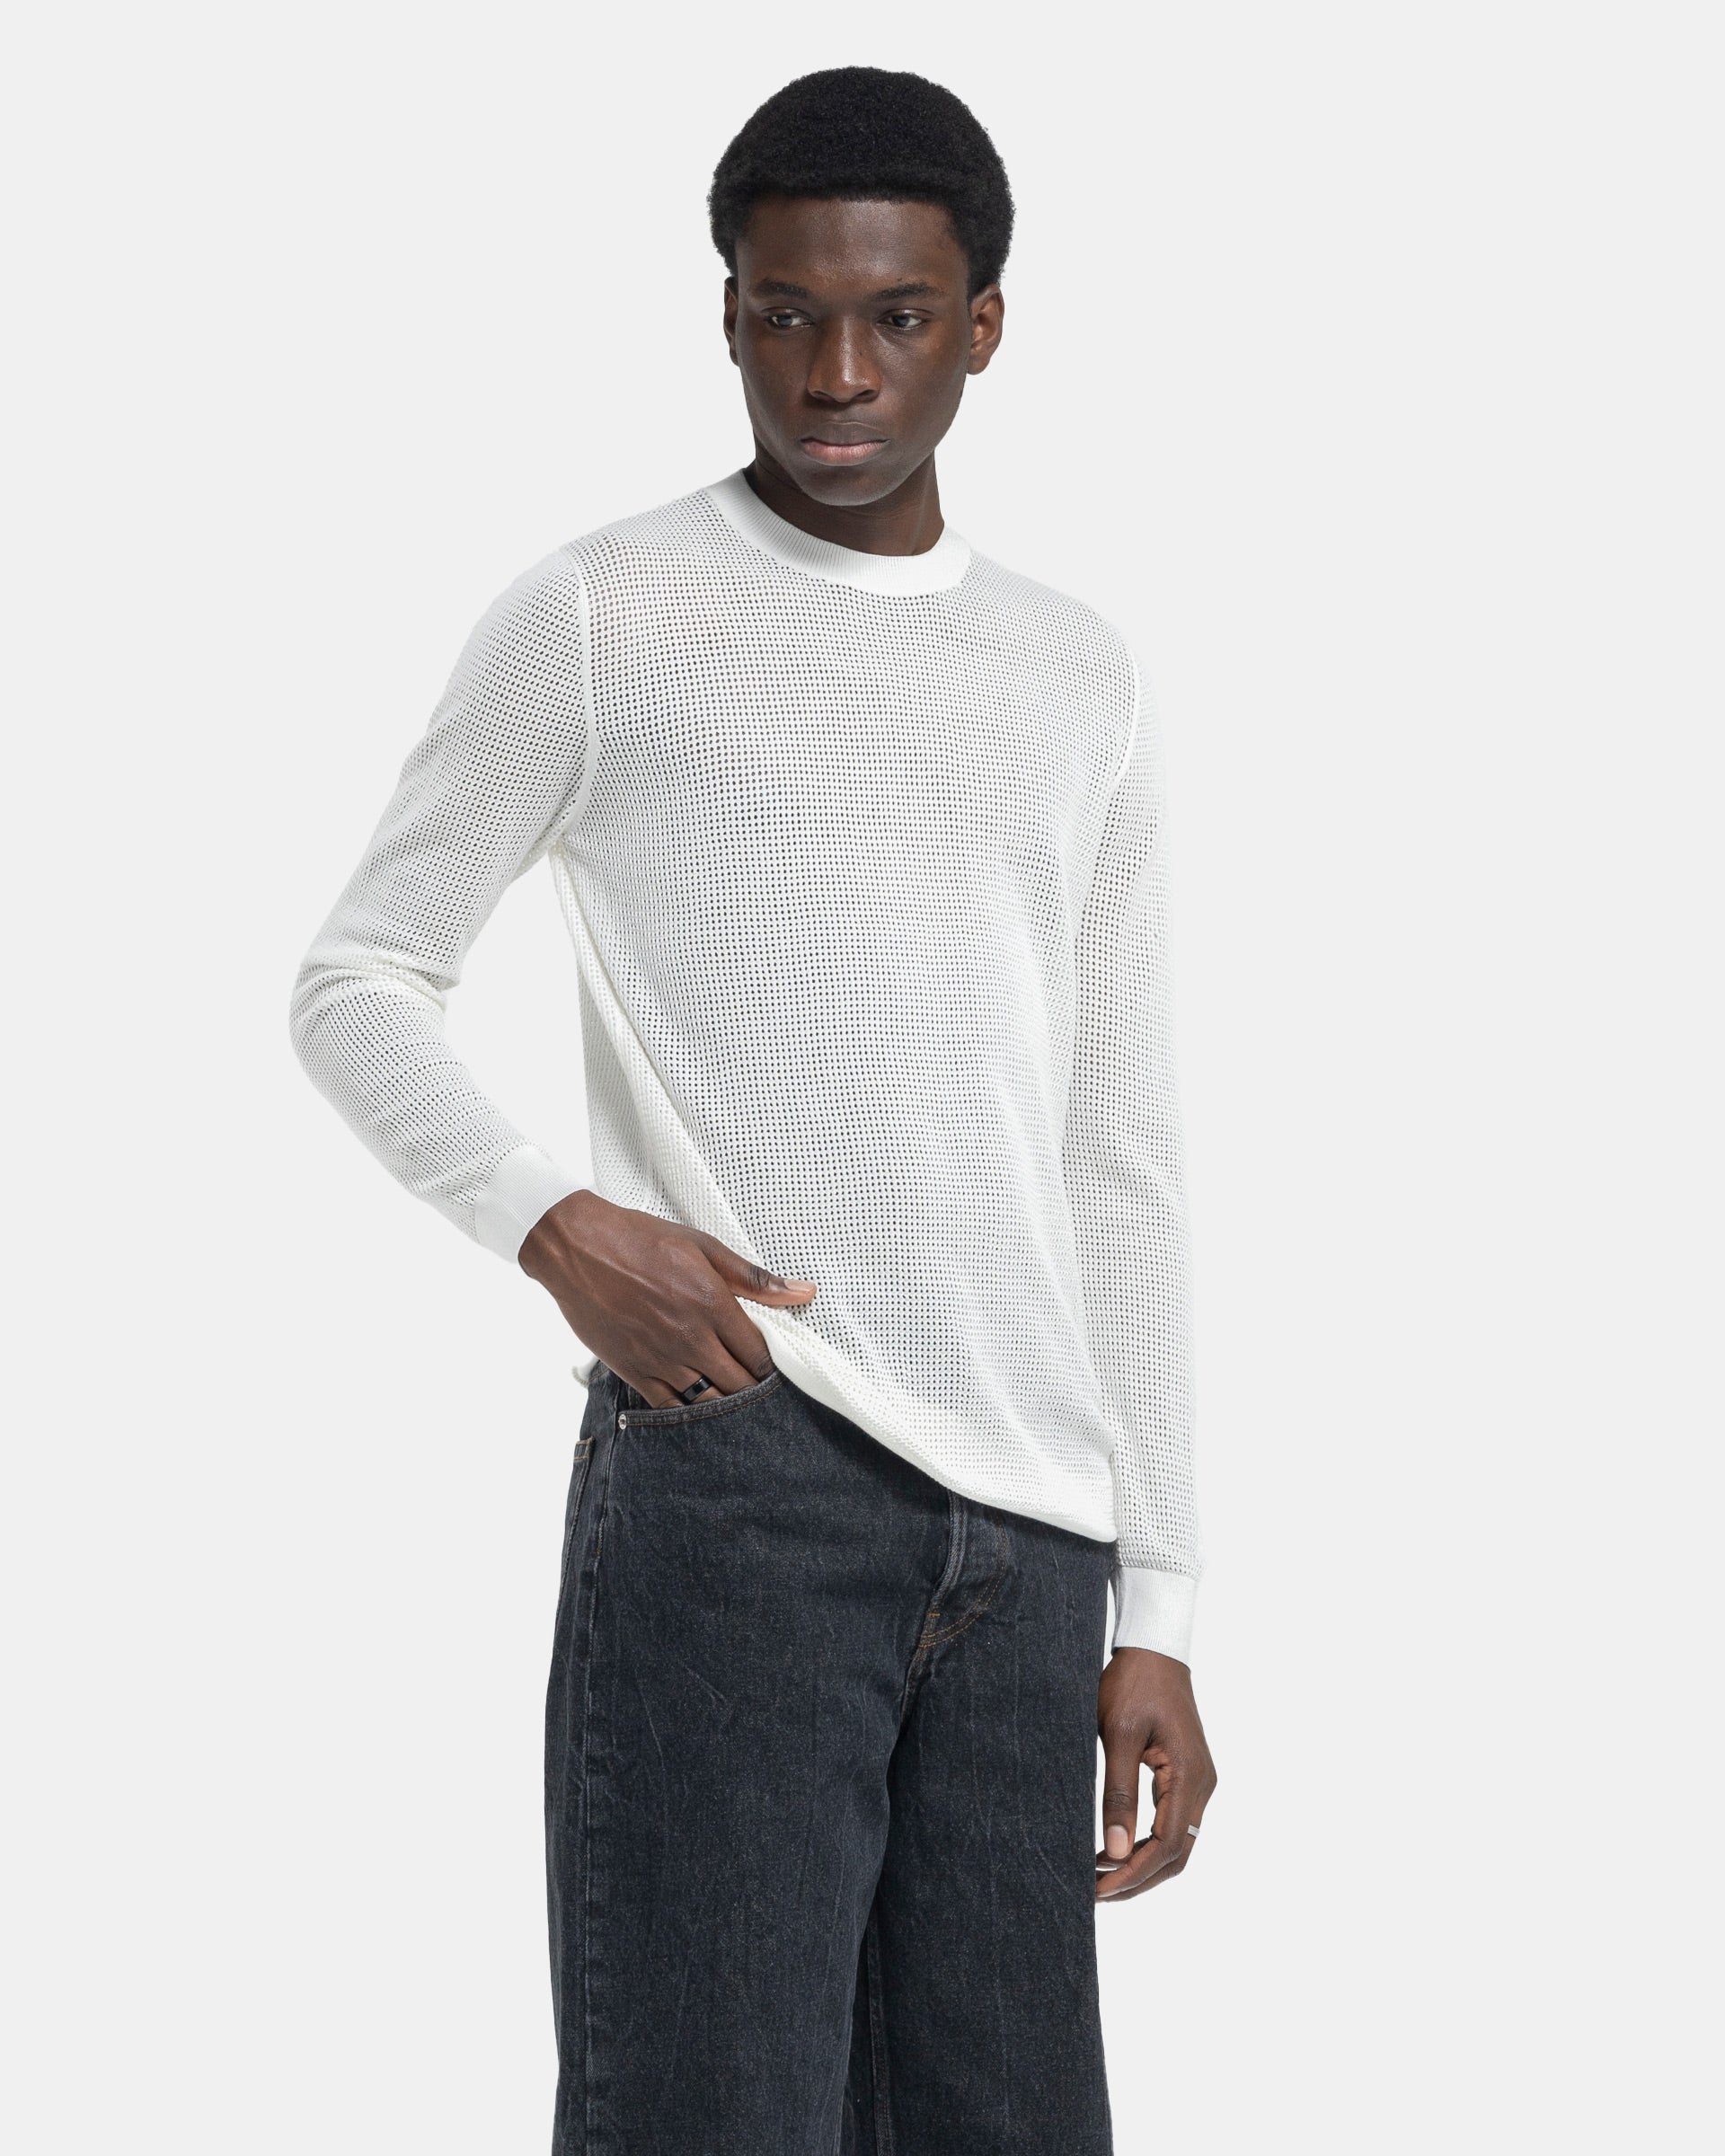 Model wearing Dries Van Noten Mixed Sweater in White on a white background